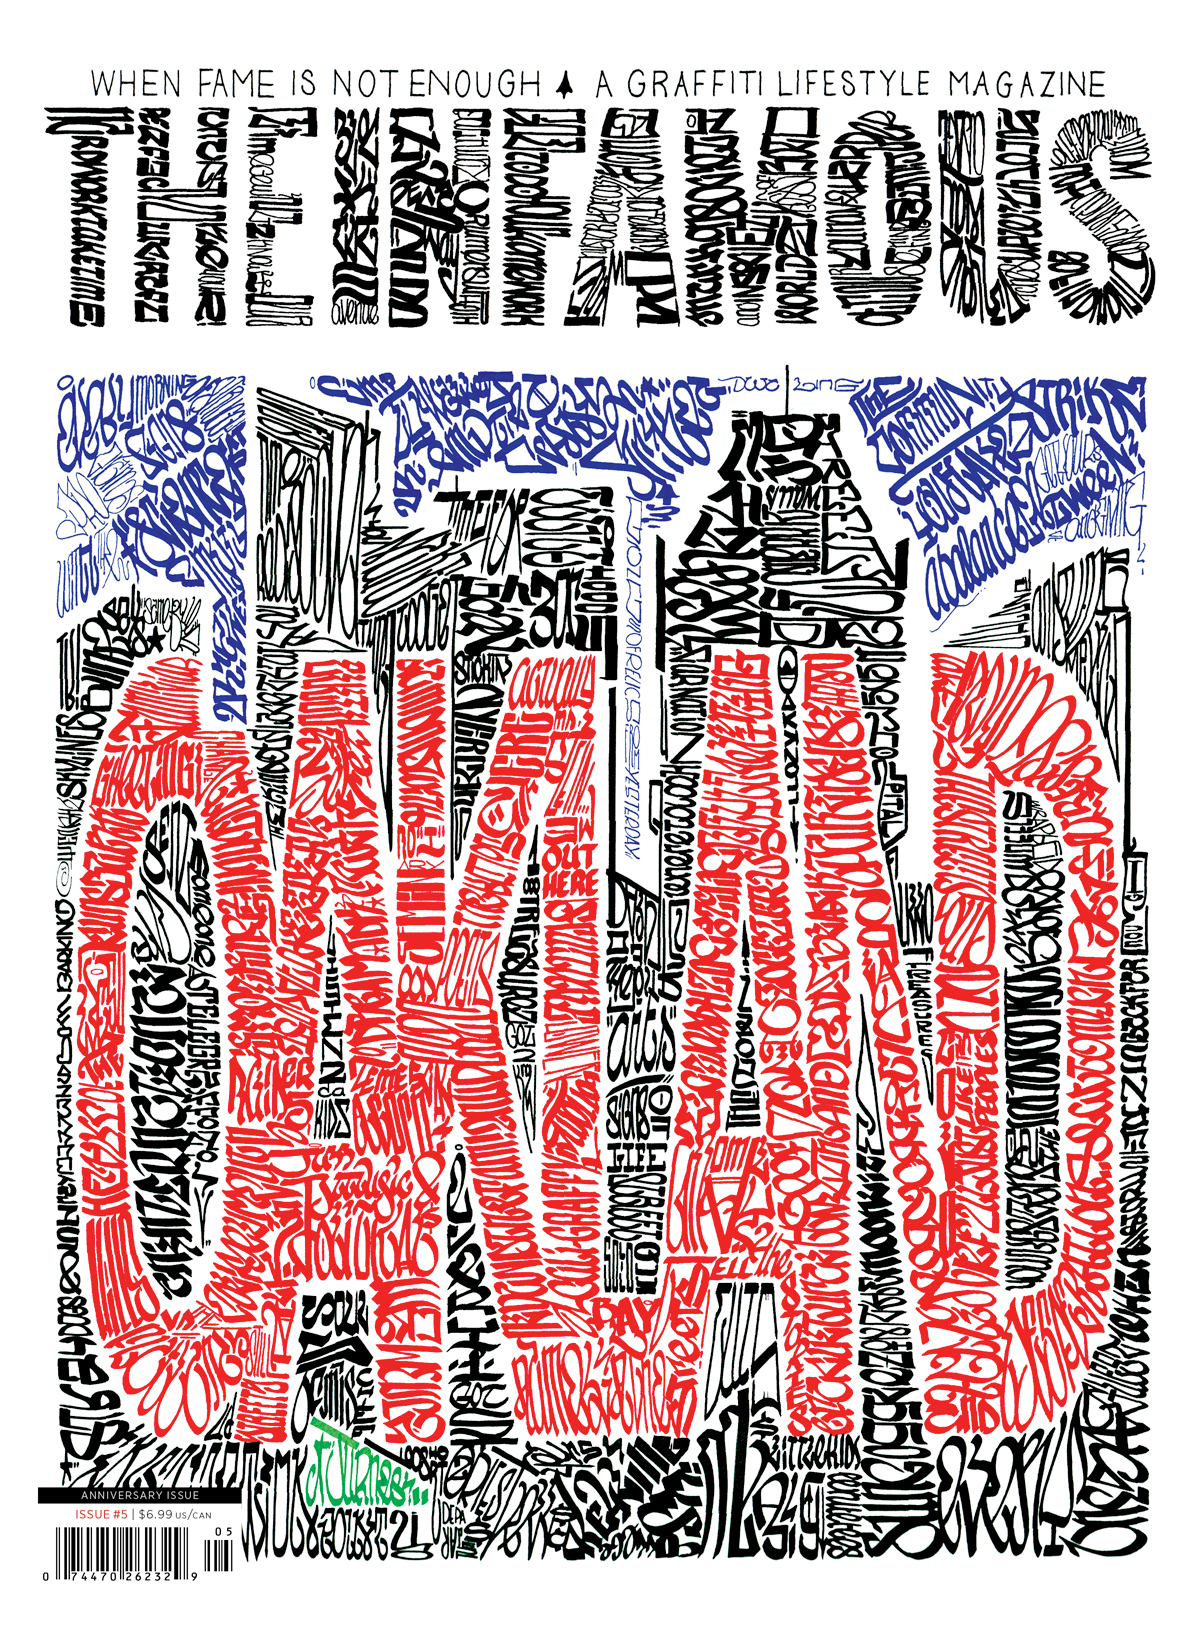 Cover of Issue 5 of The Infamous magazine, 2011. Illustration by Jurne.